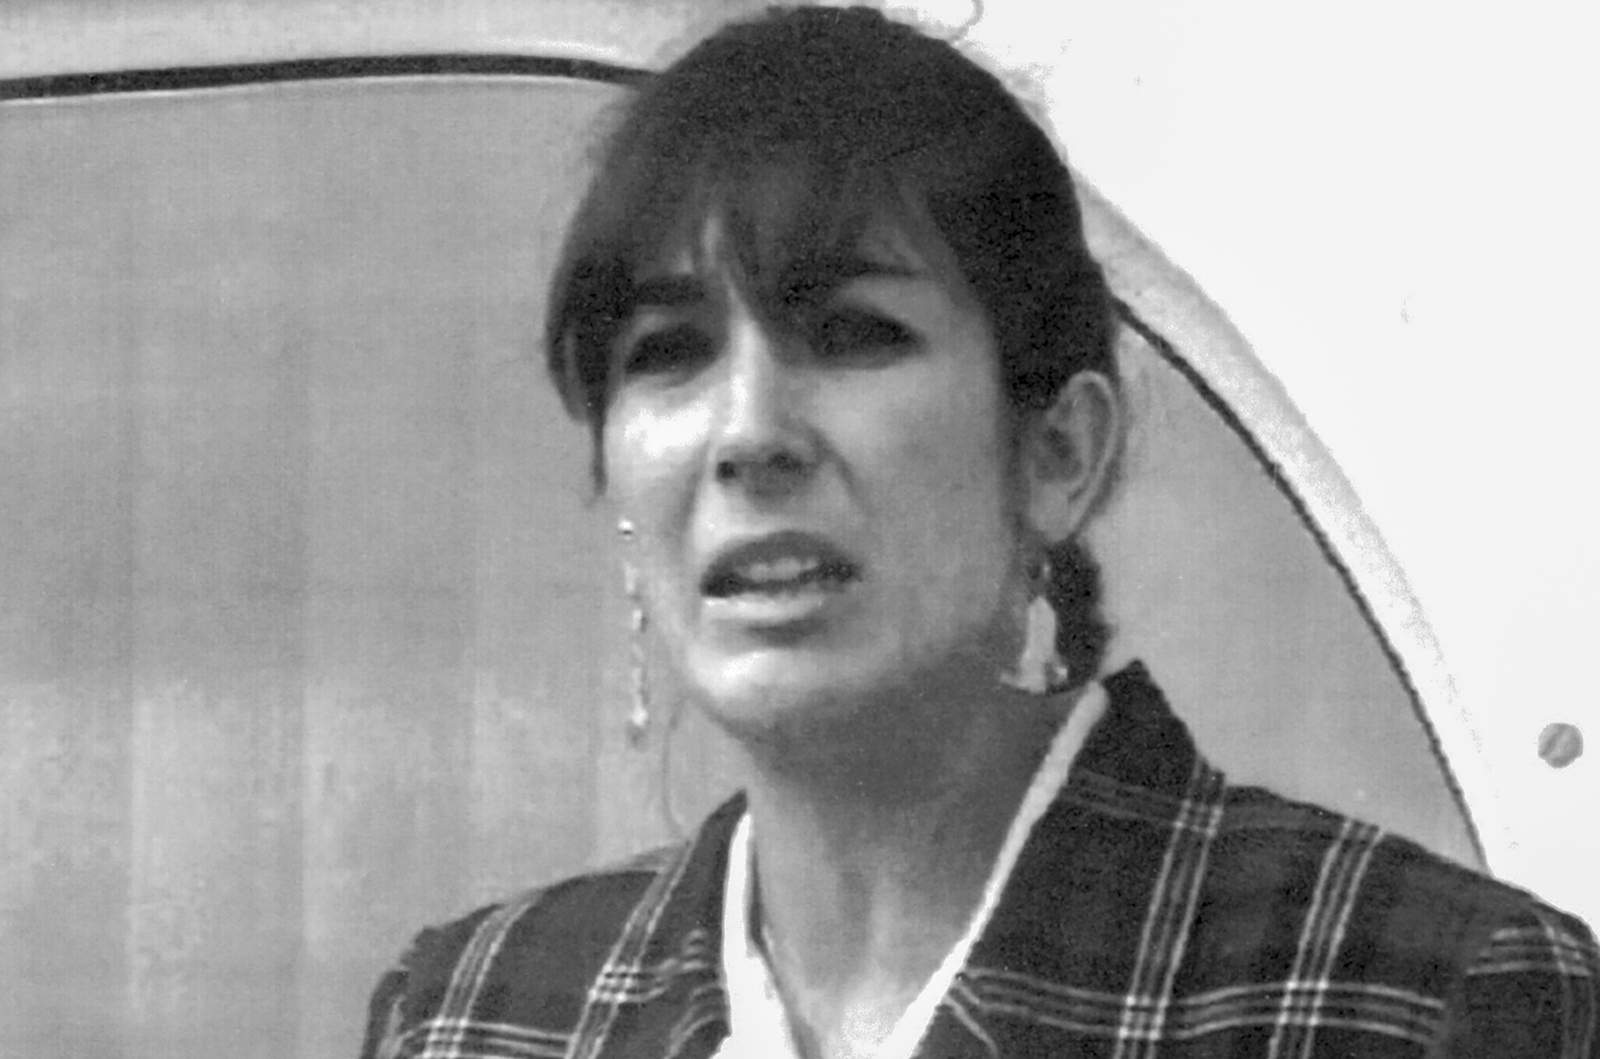 Ghislaine Maxwell jail conditions 'degrading,' says brother